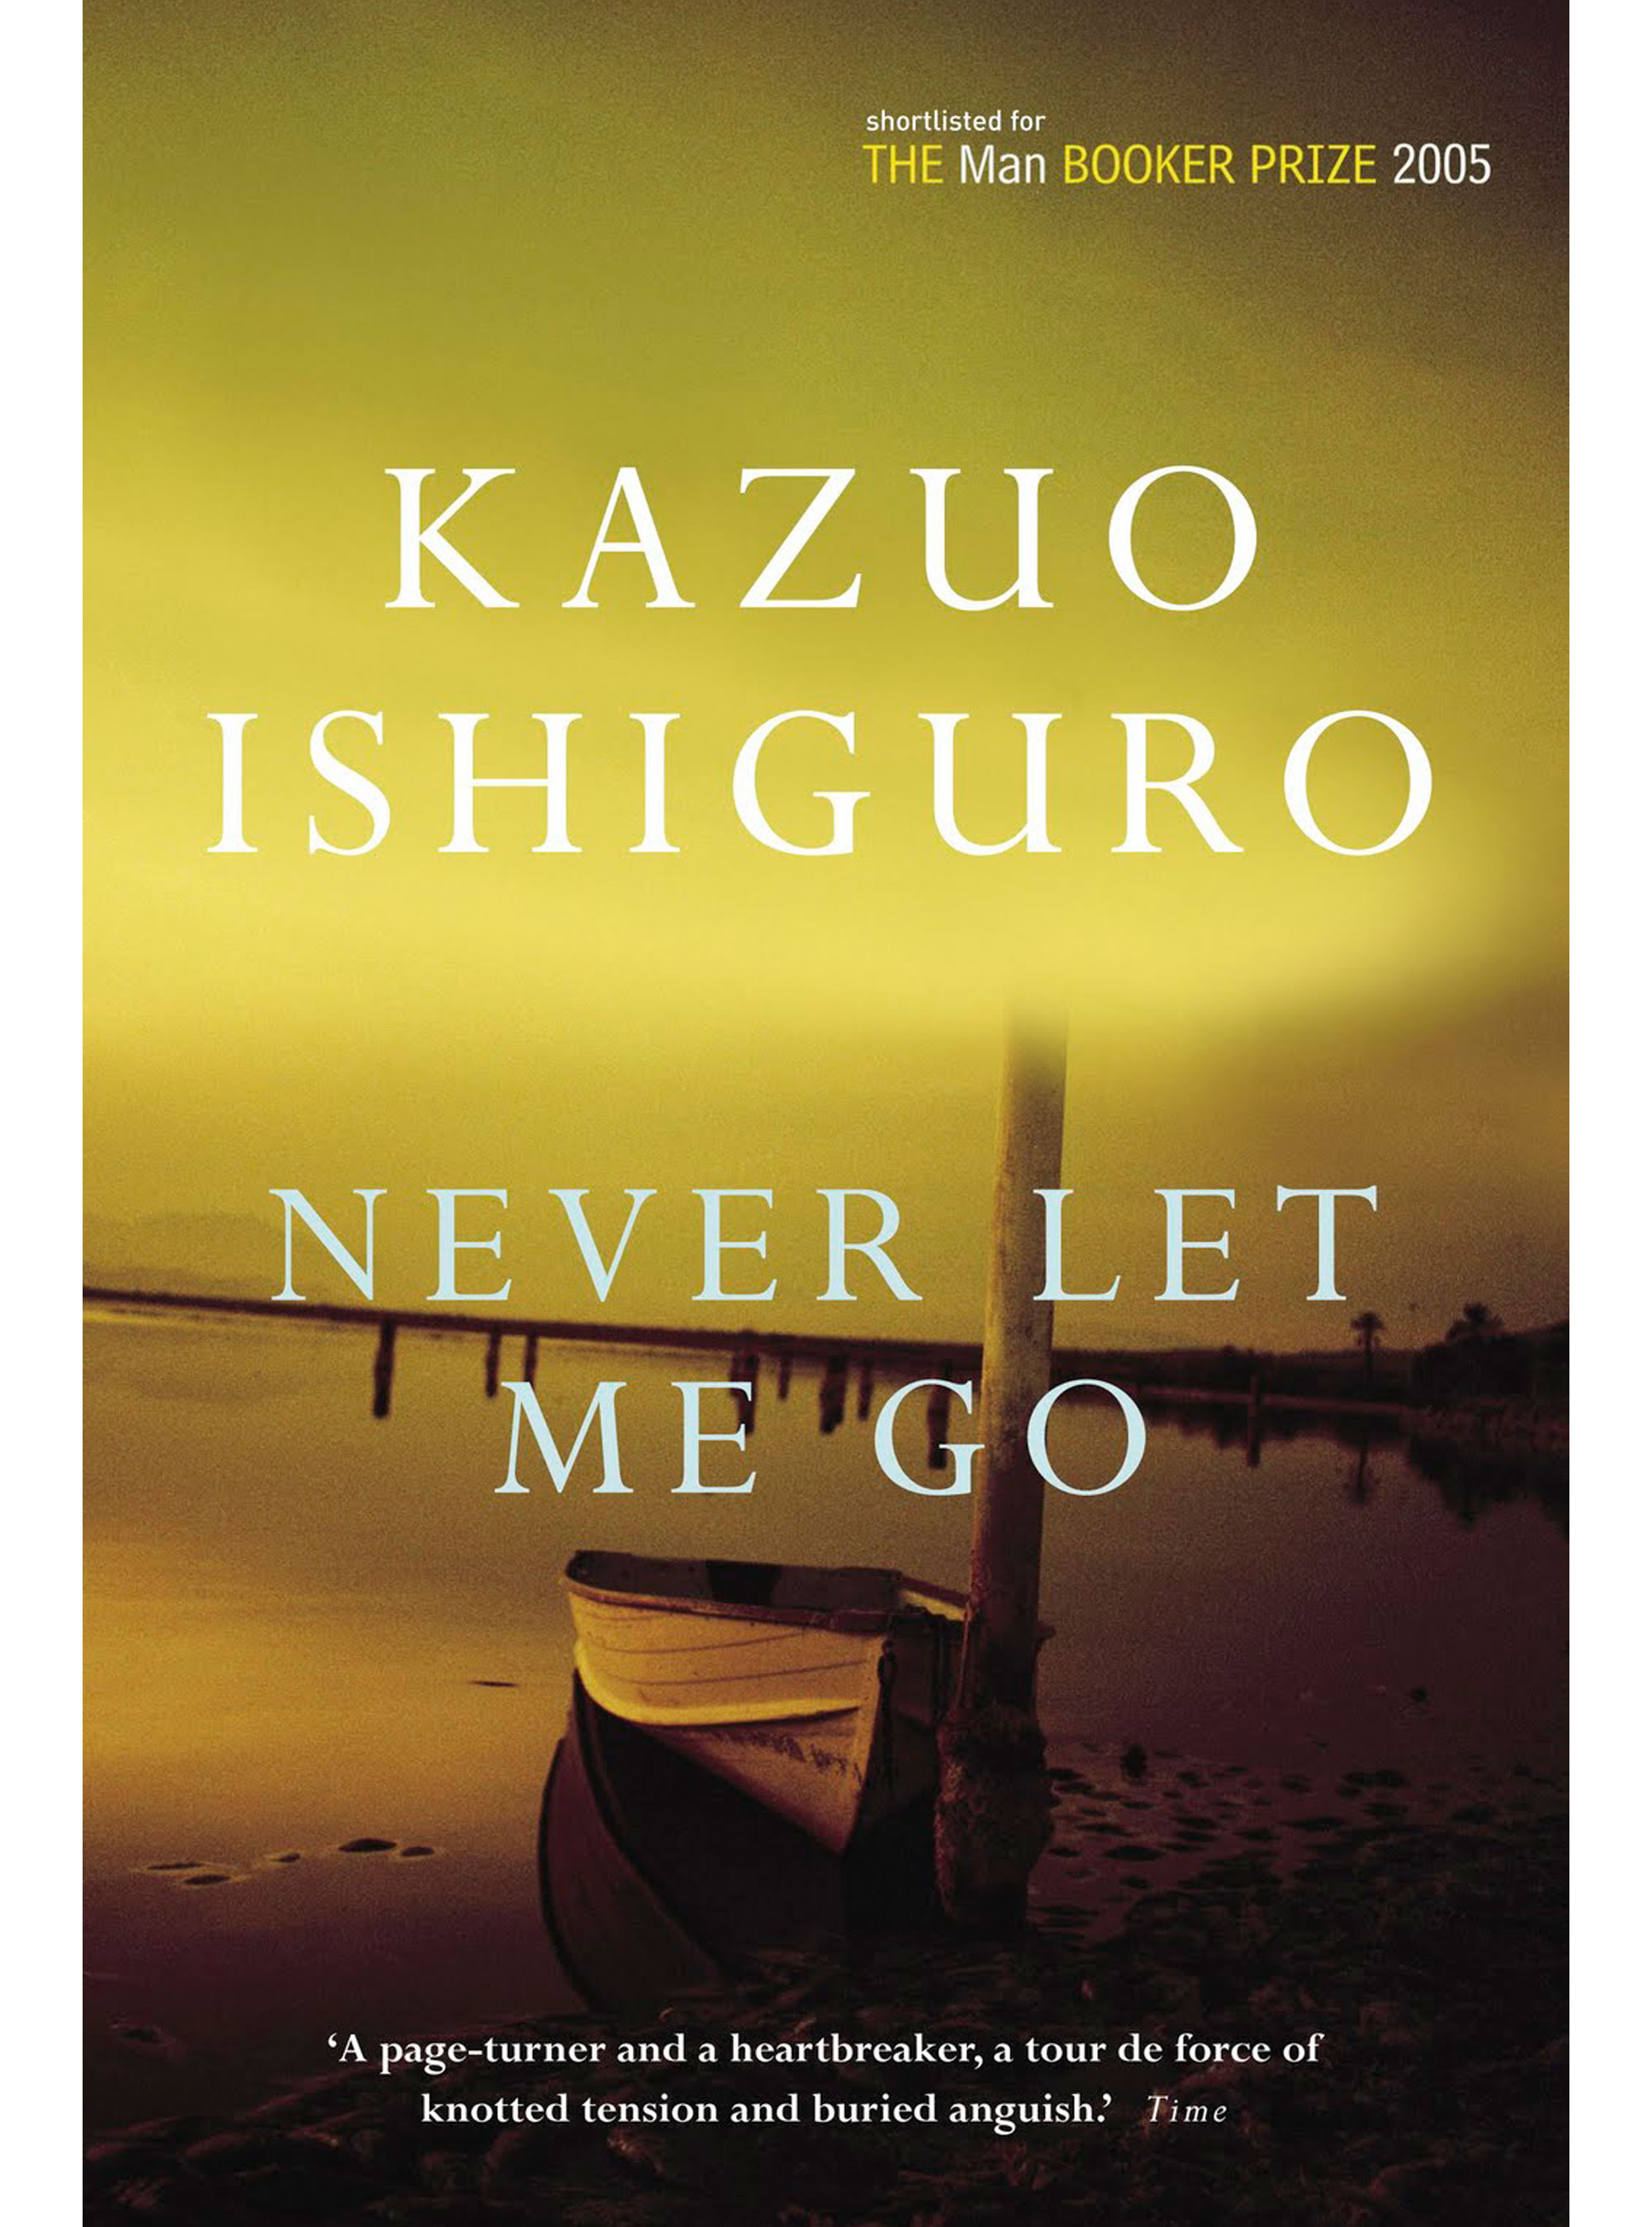 never let me go book review